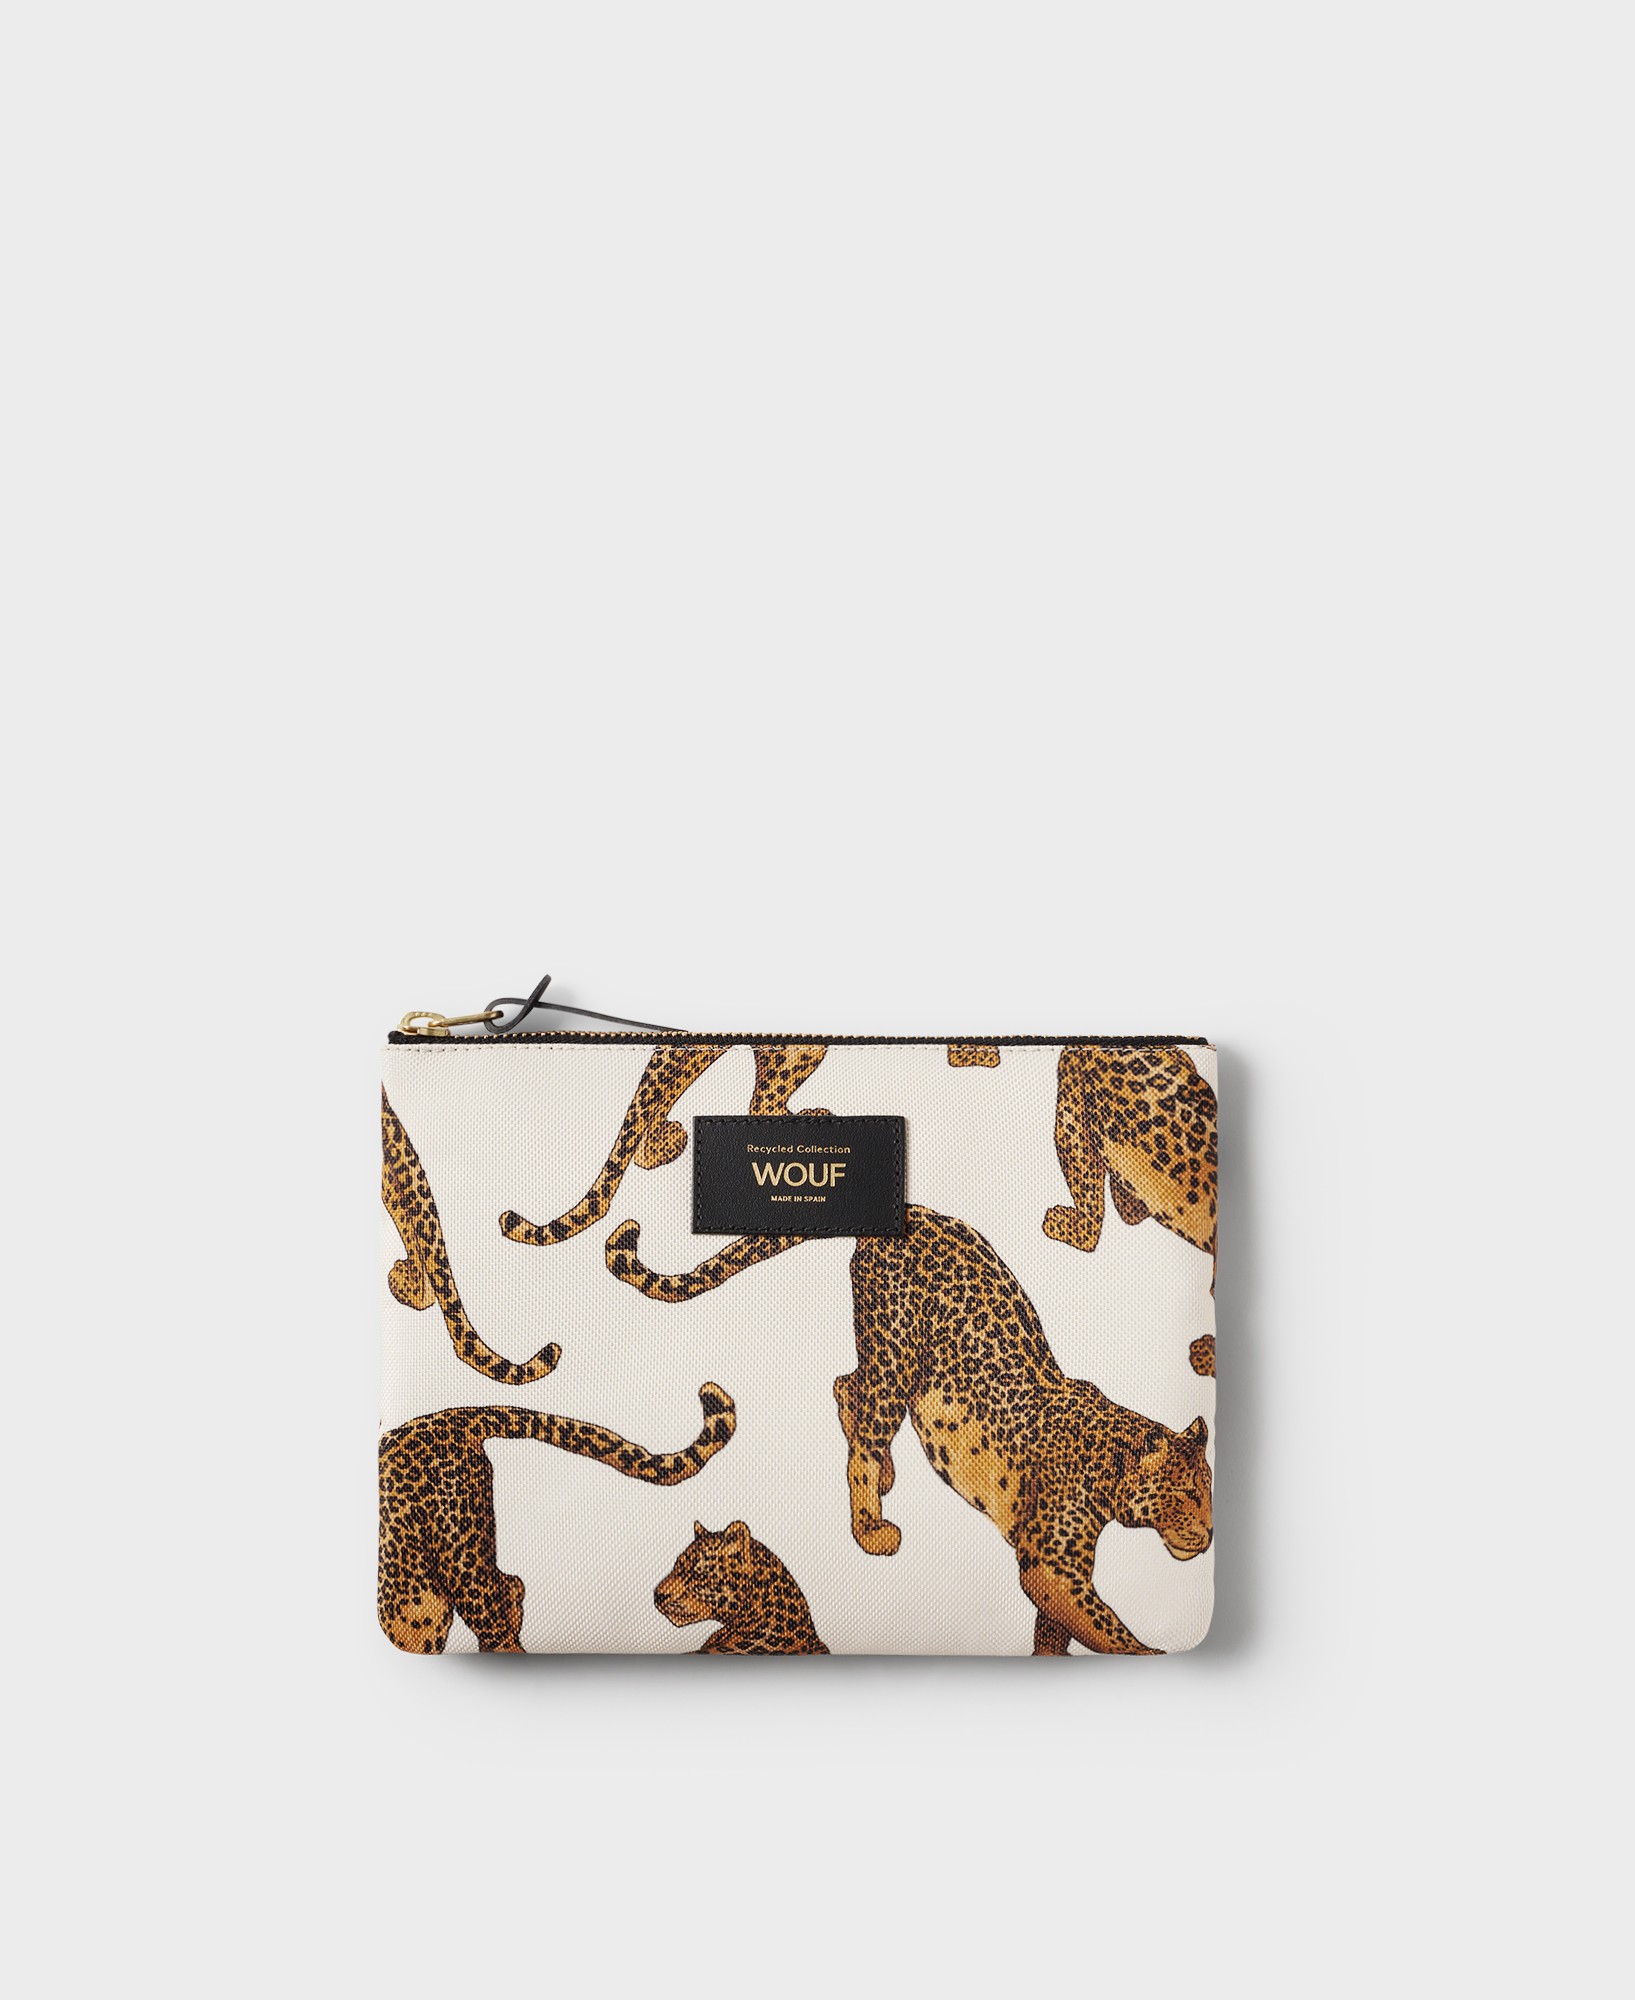 Wouf The Leopard Pouch